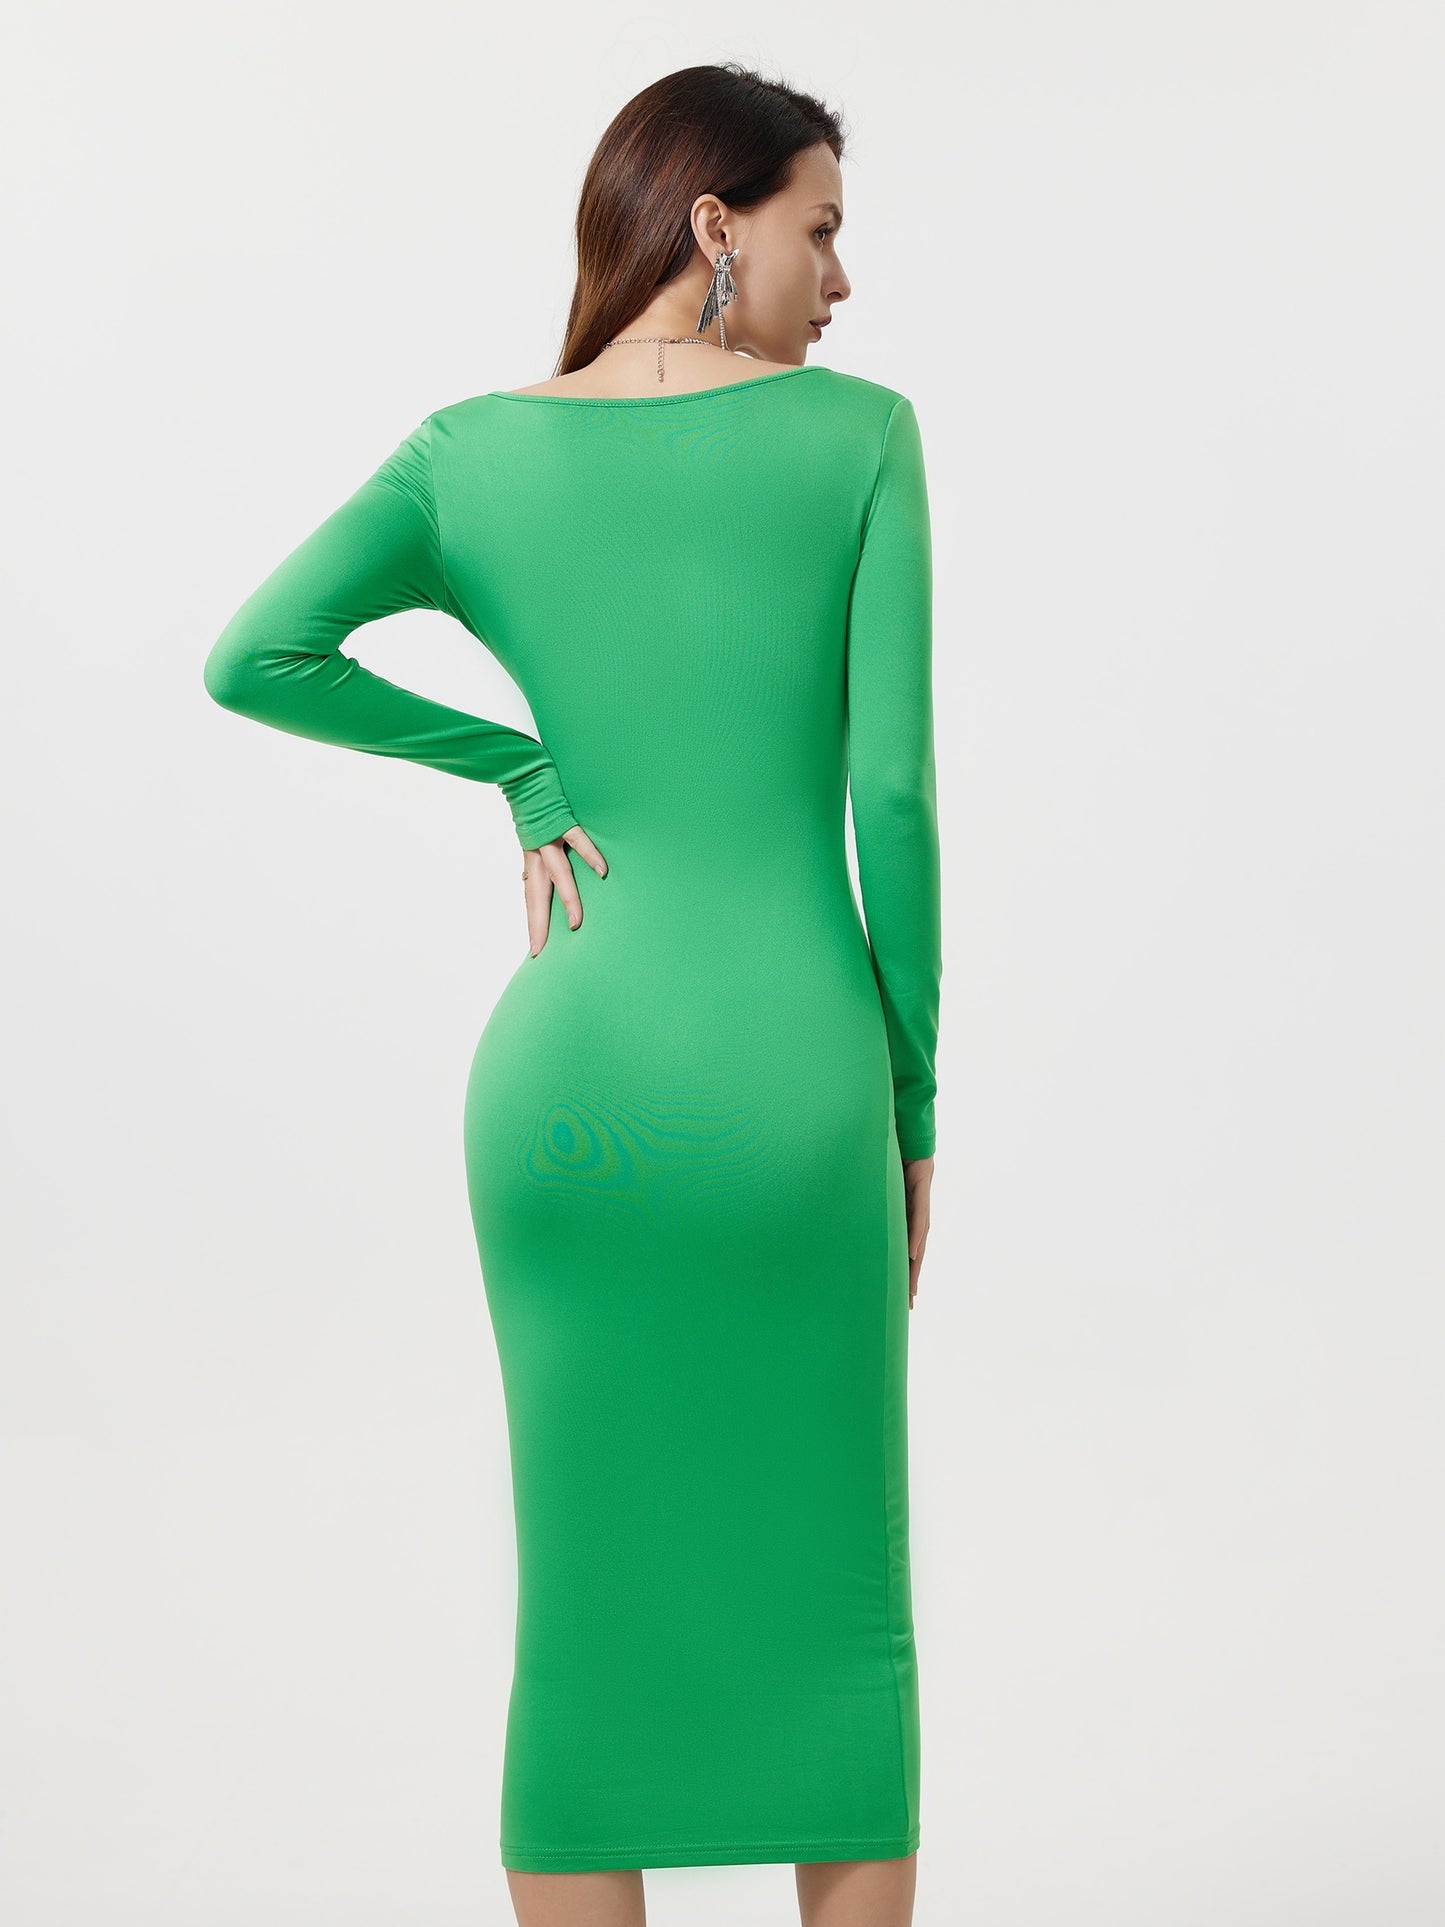 Antmvs Squared Neck Bodycon Dress, Casual Solid Long Sleeve Midi Dress, Women's Clothing